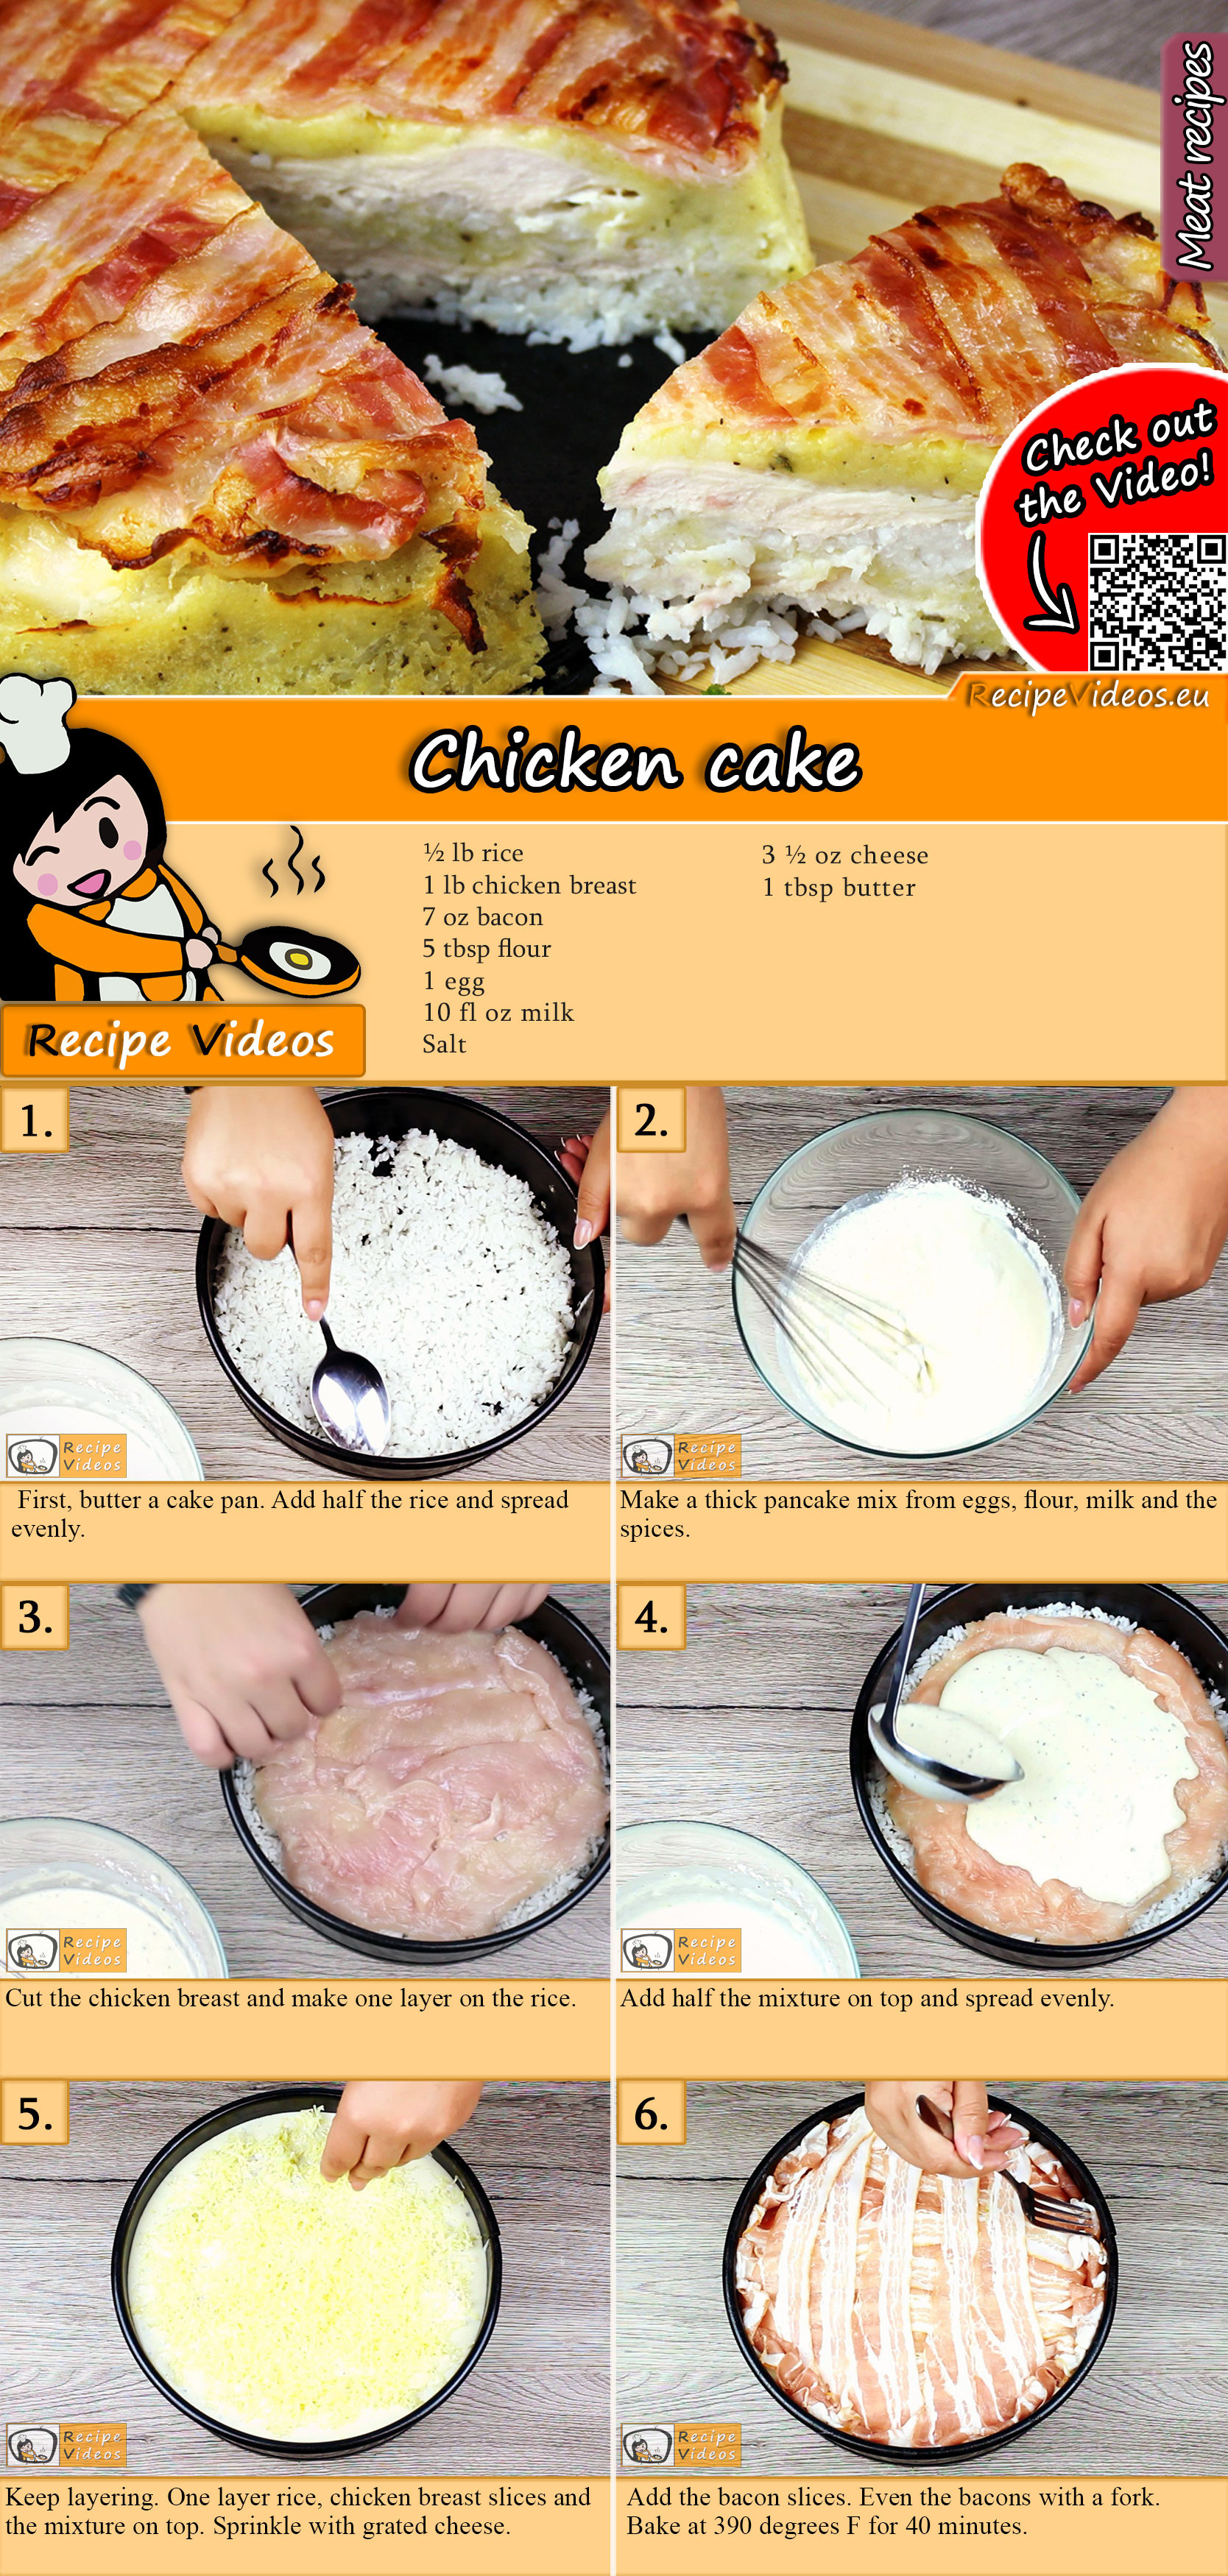 Chicken cake recipe with video